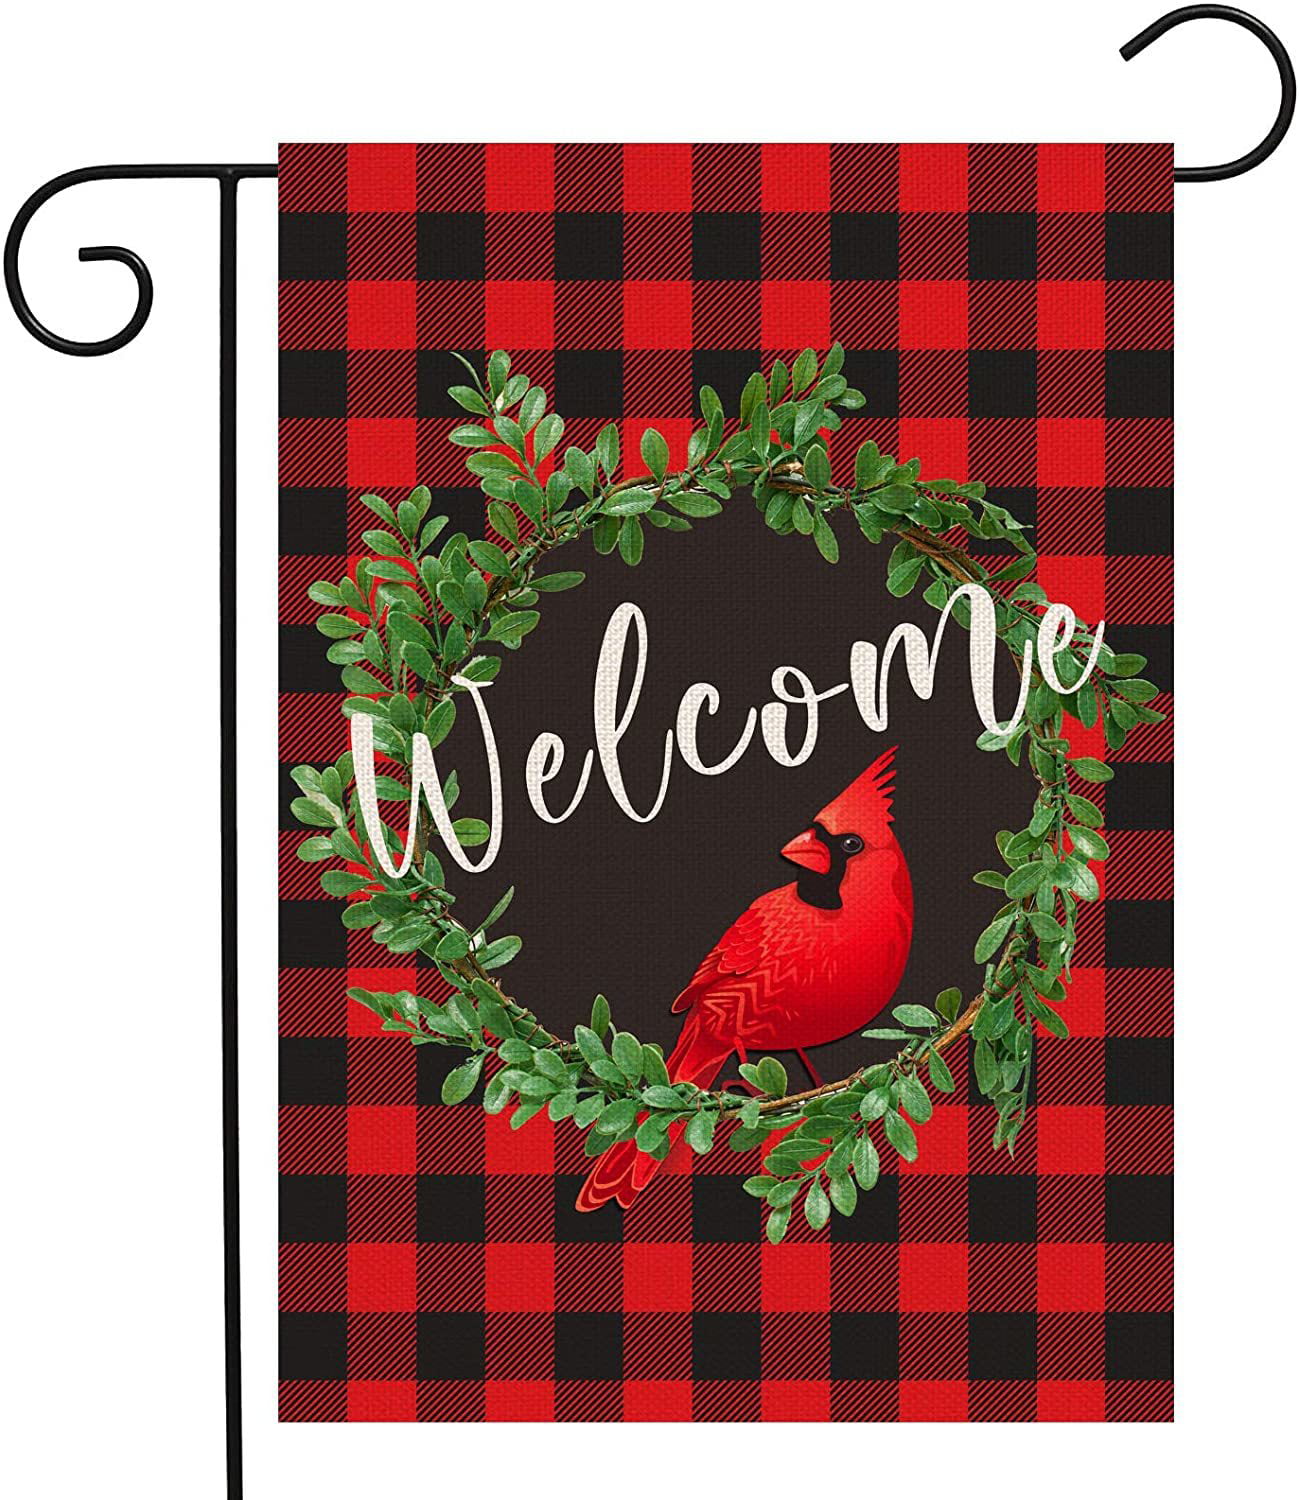 12.5 x 18 Inches Double Sided Mogarden Welcome Spring Garden Flag Buffalo Check Plaid Boxwood Wreath Premium Burlap Yard Flag for All Seasons for Outside 